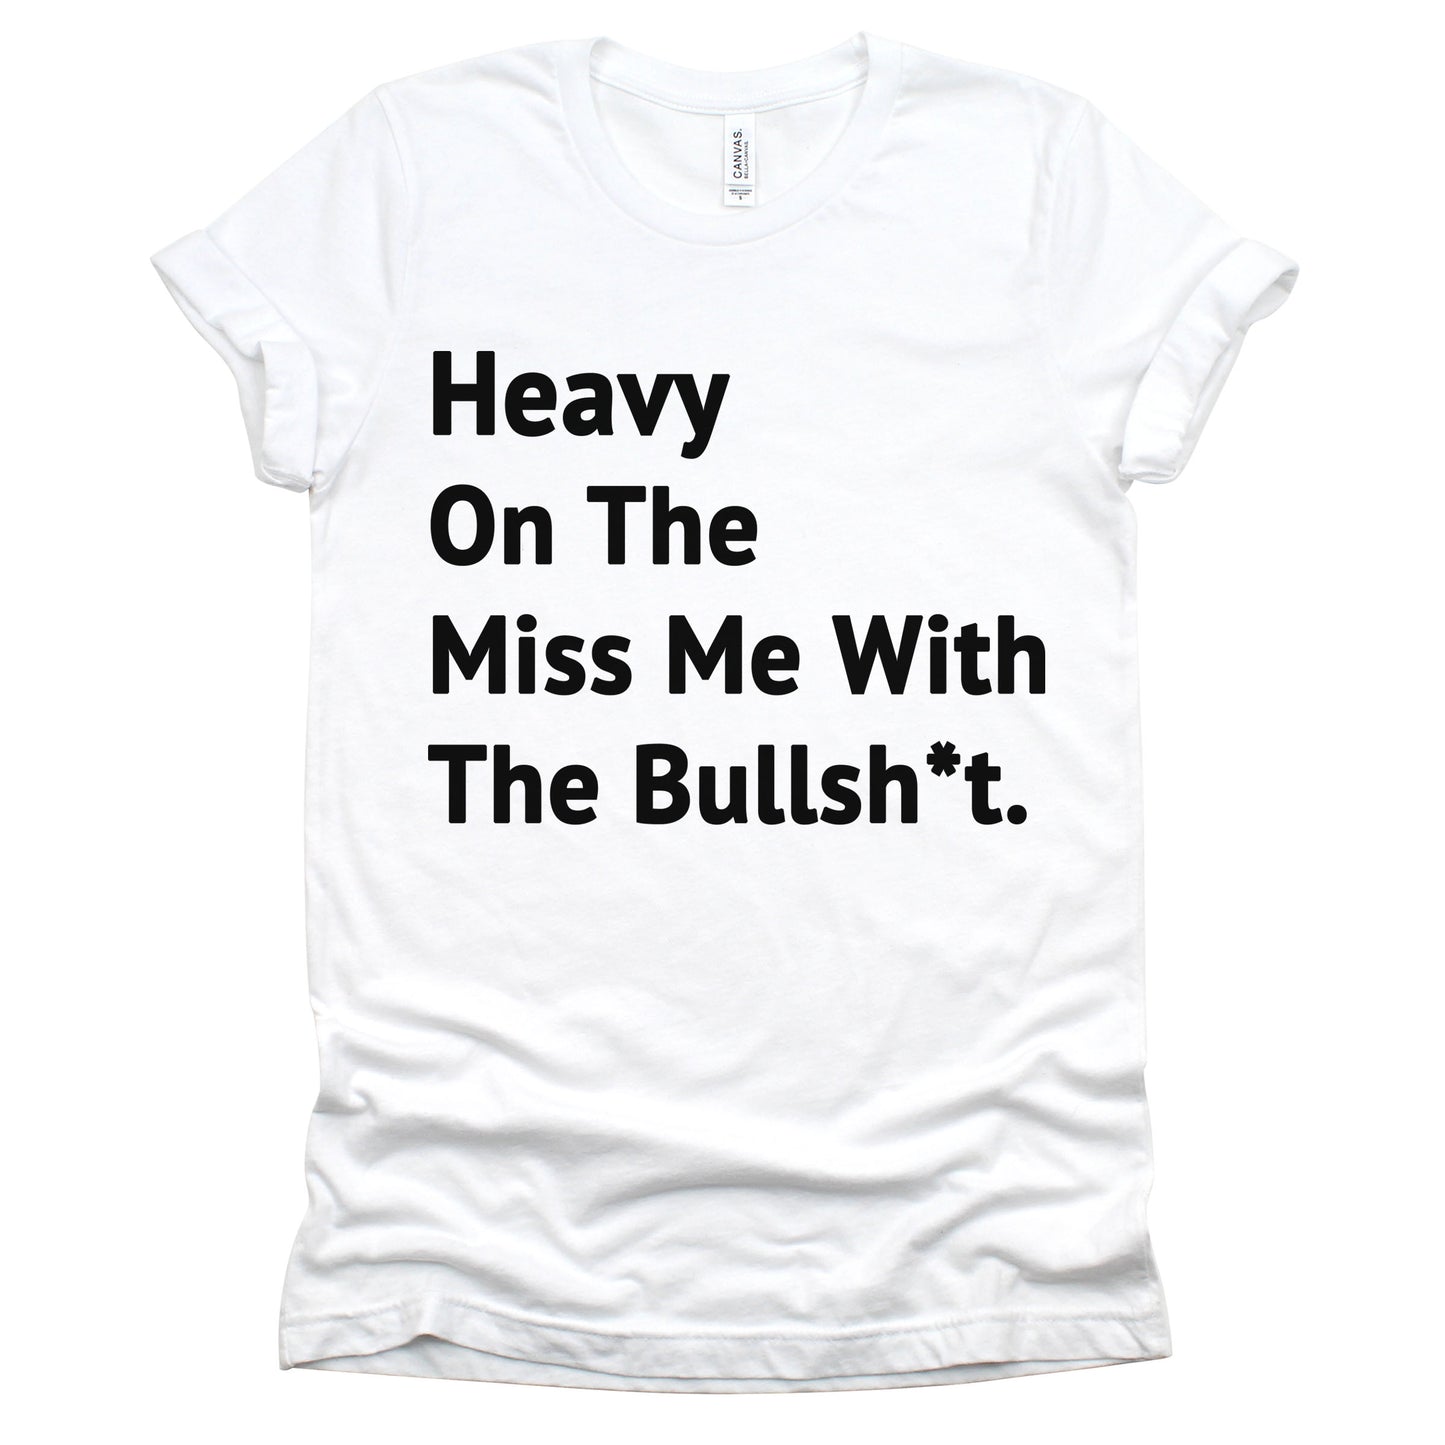 "Heavy On The Miss Me With The Bullsh*t" Tee